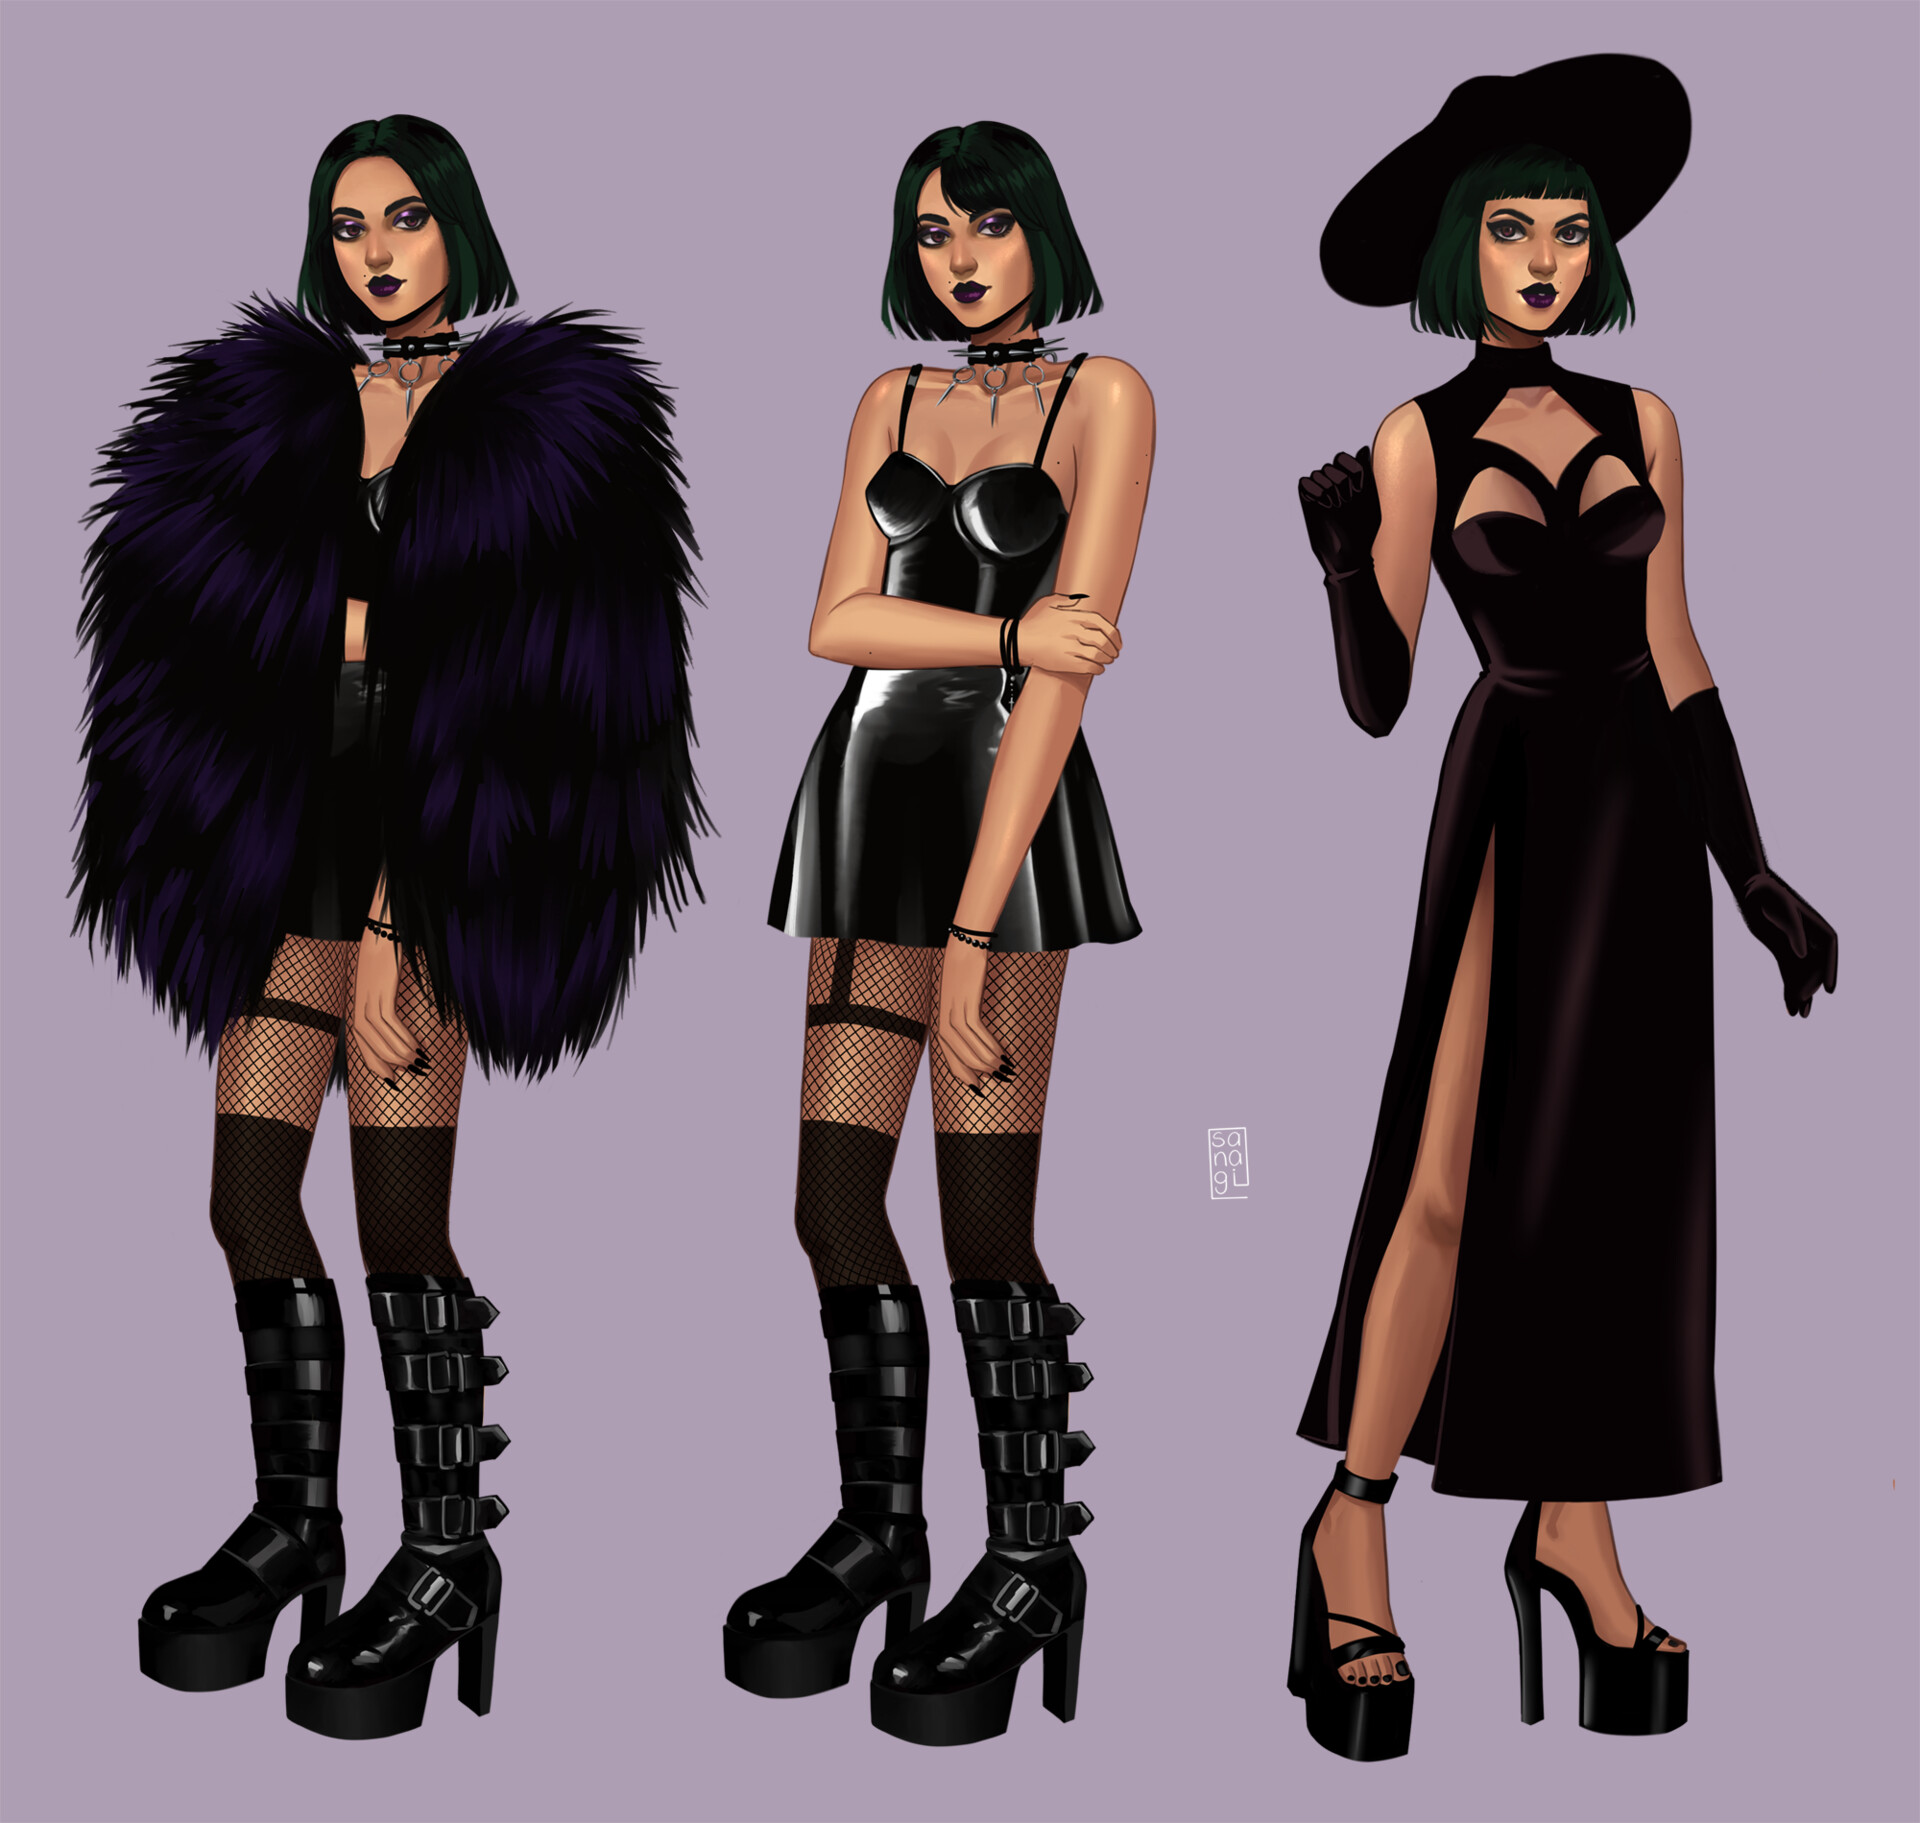 ArtStation - Dayan - Goth outfits